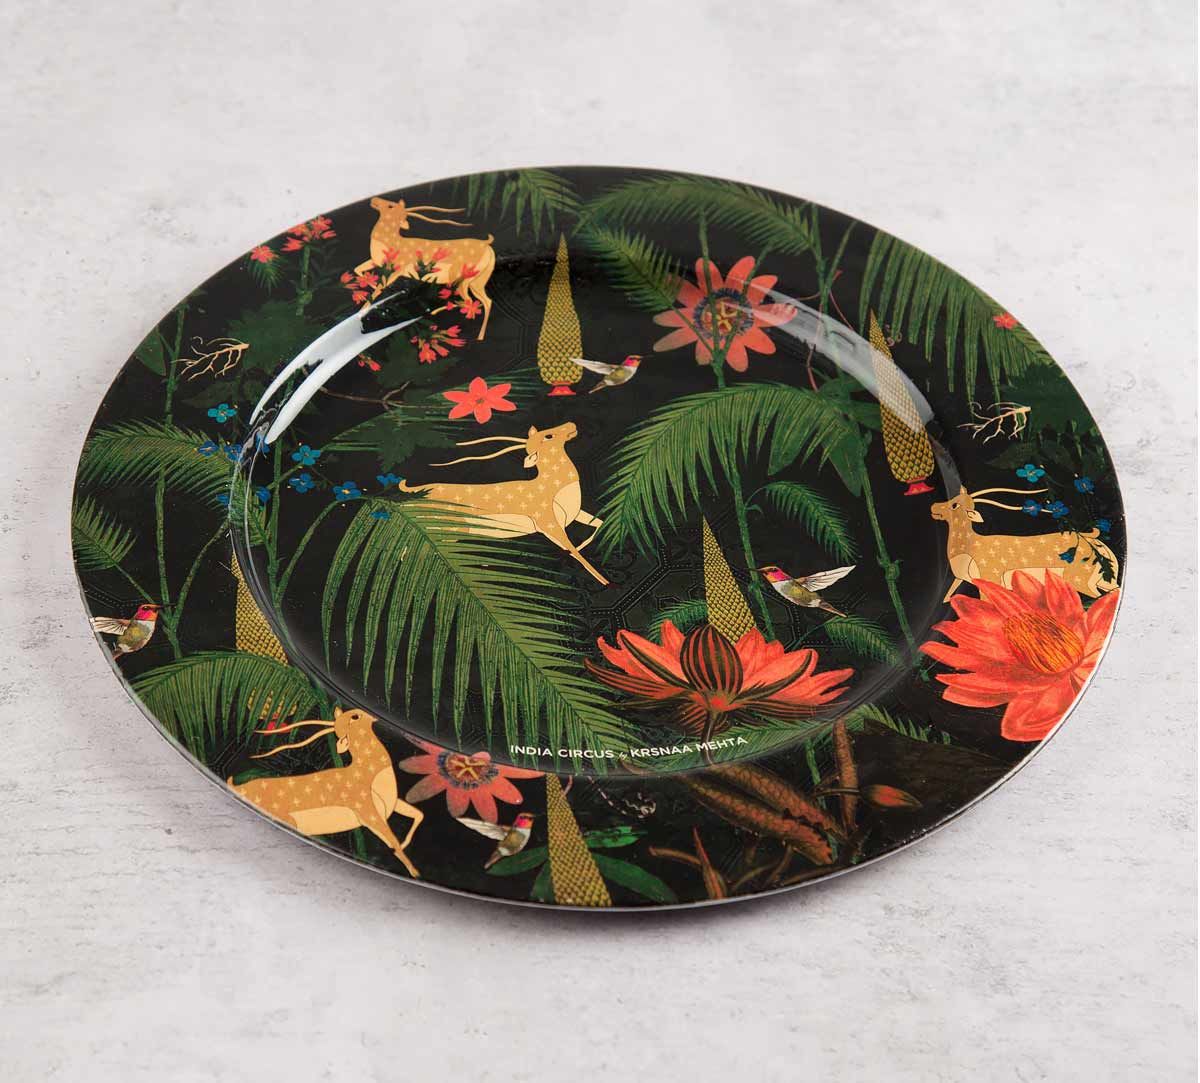 India Circus Forest Fetish 11 inch Decor Plate